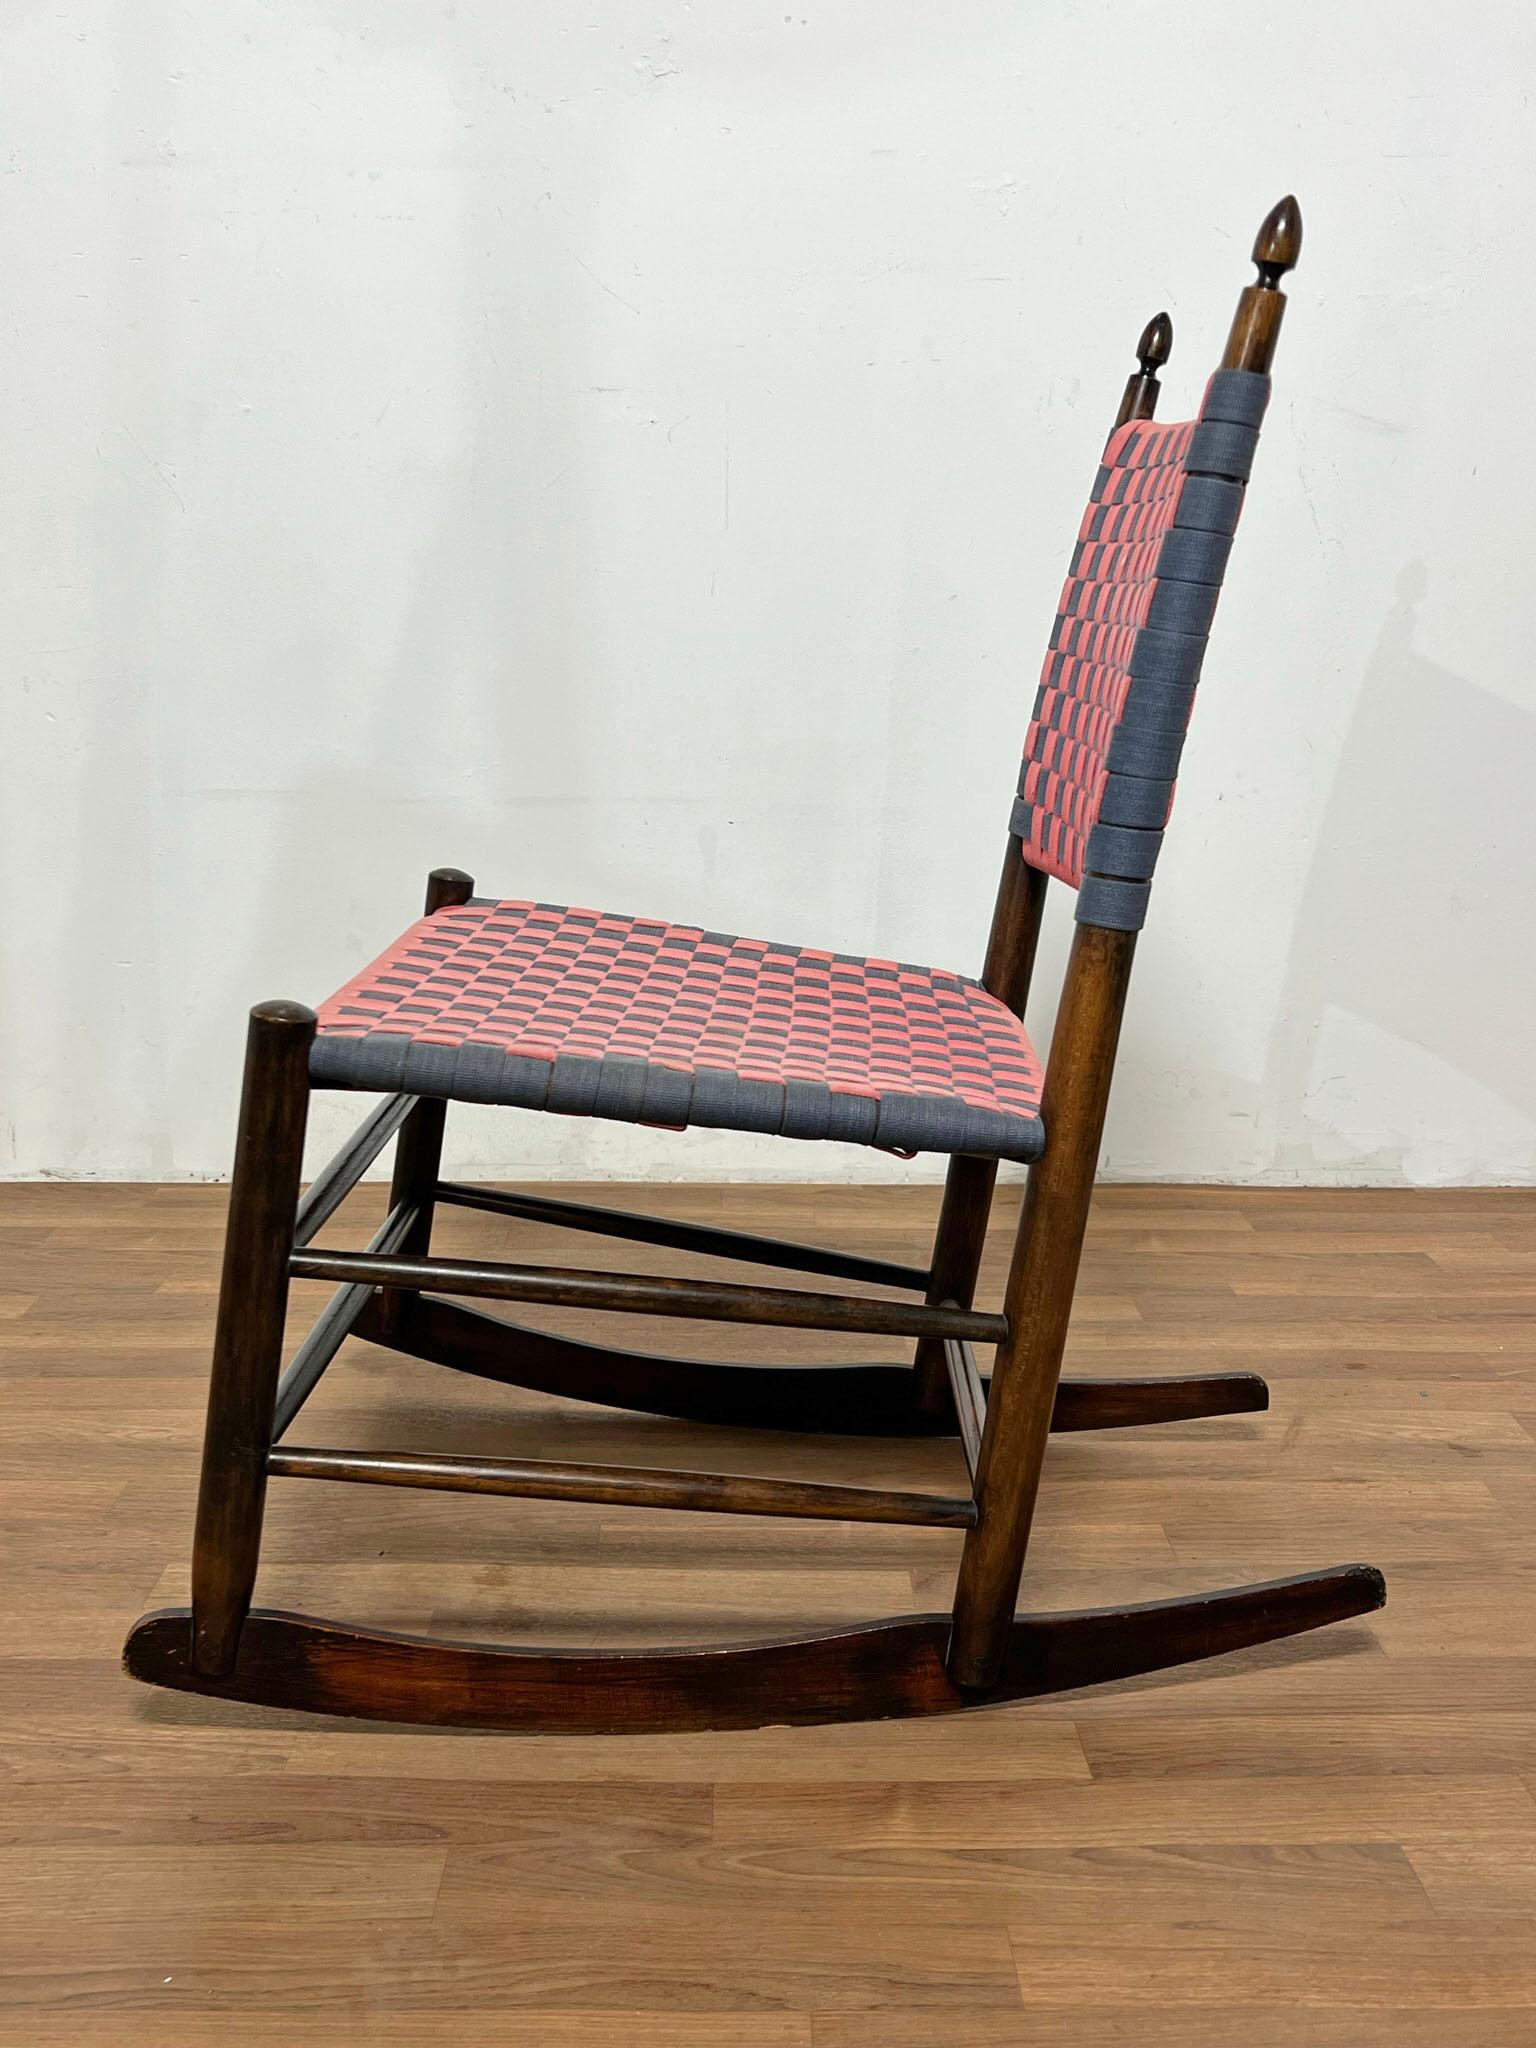 An original Shaker rocking chair with taped backrest from the Mt. Lebanon, NY Community of Believers circa. 1850.